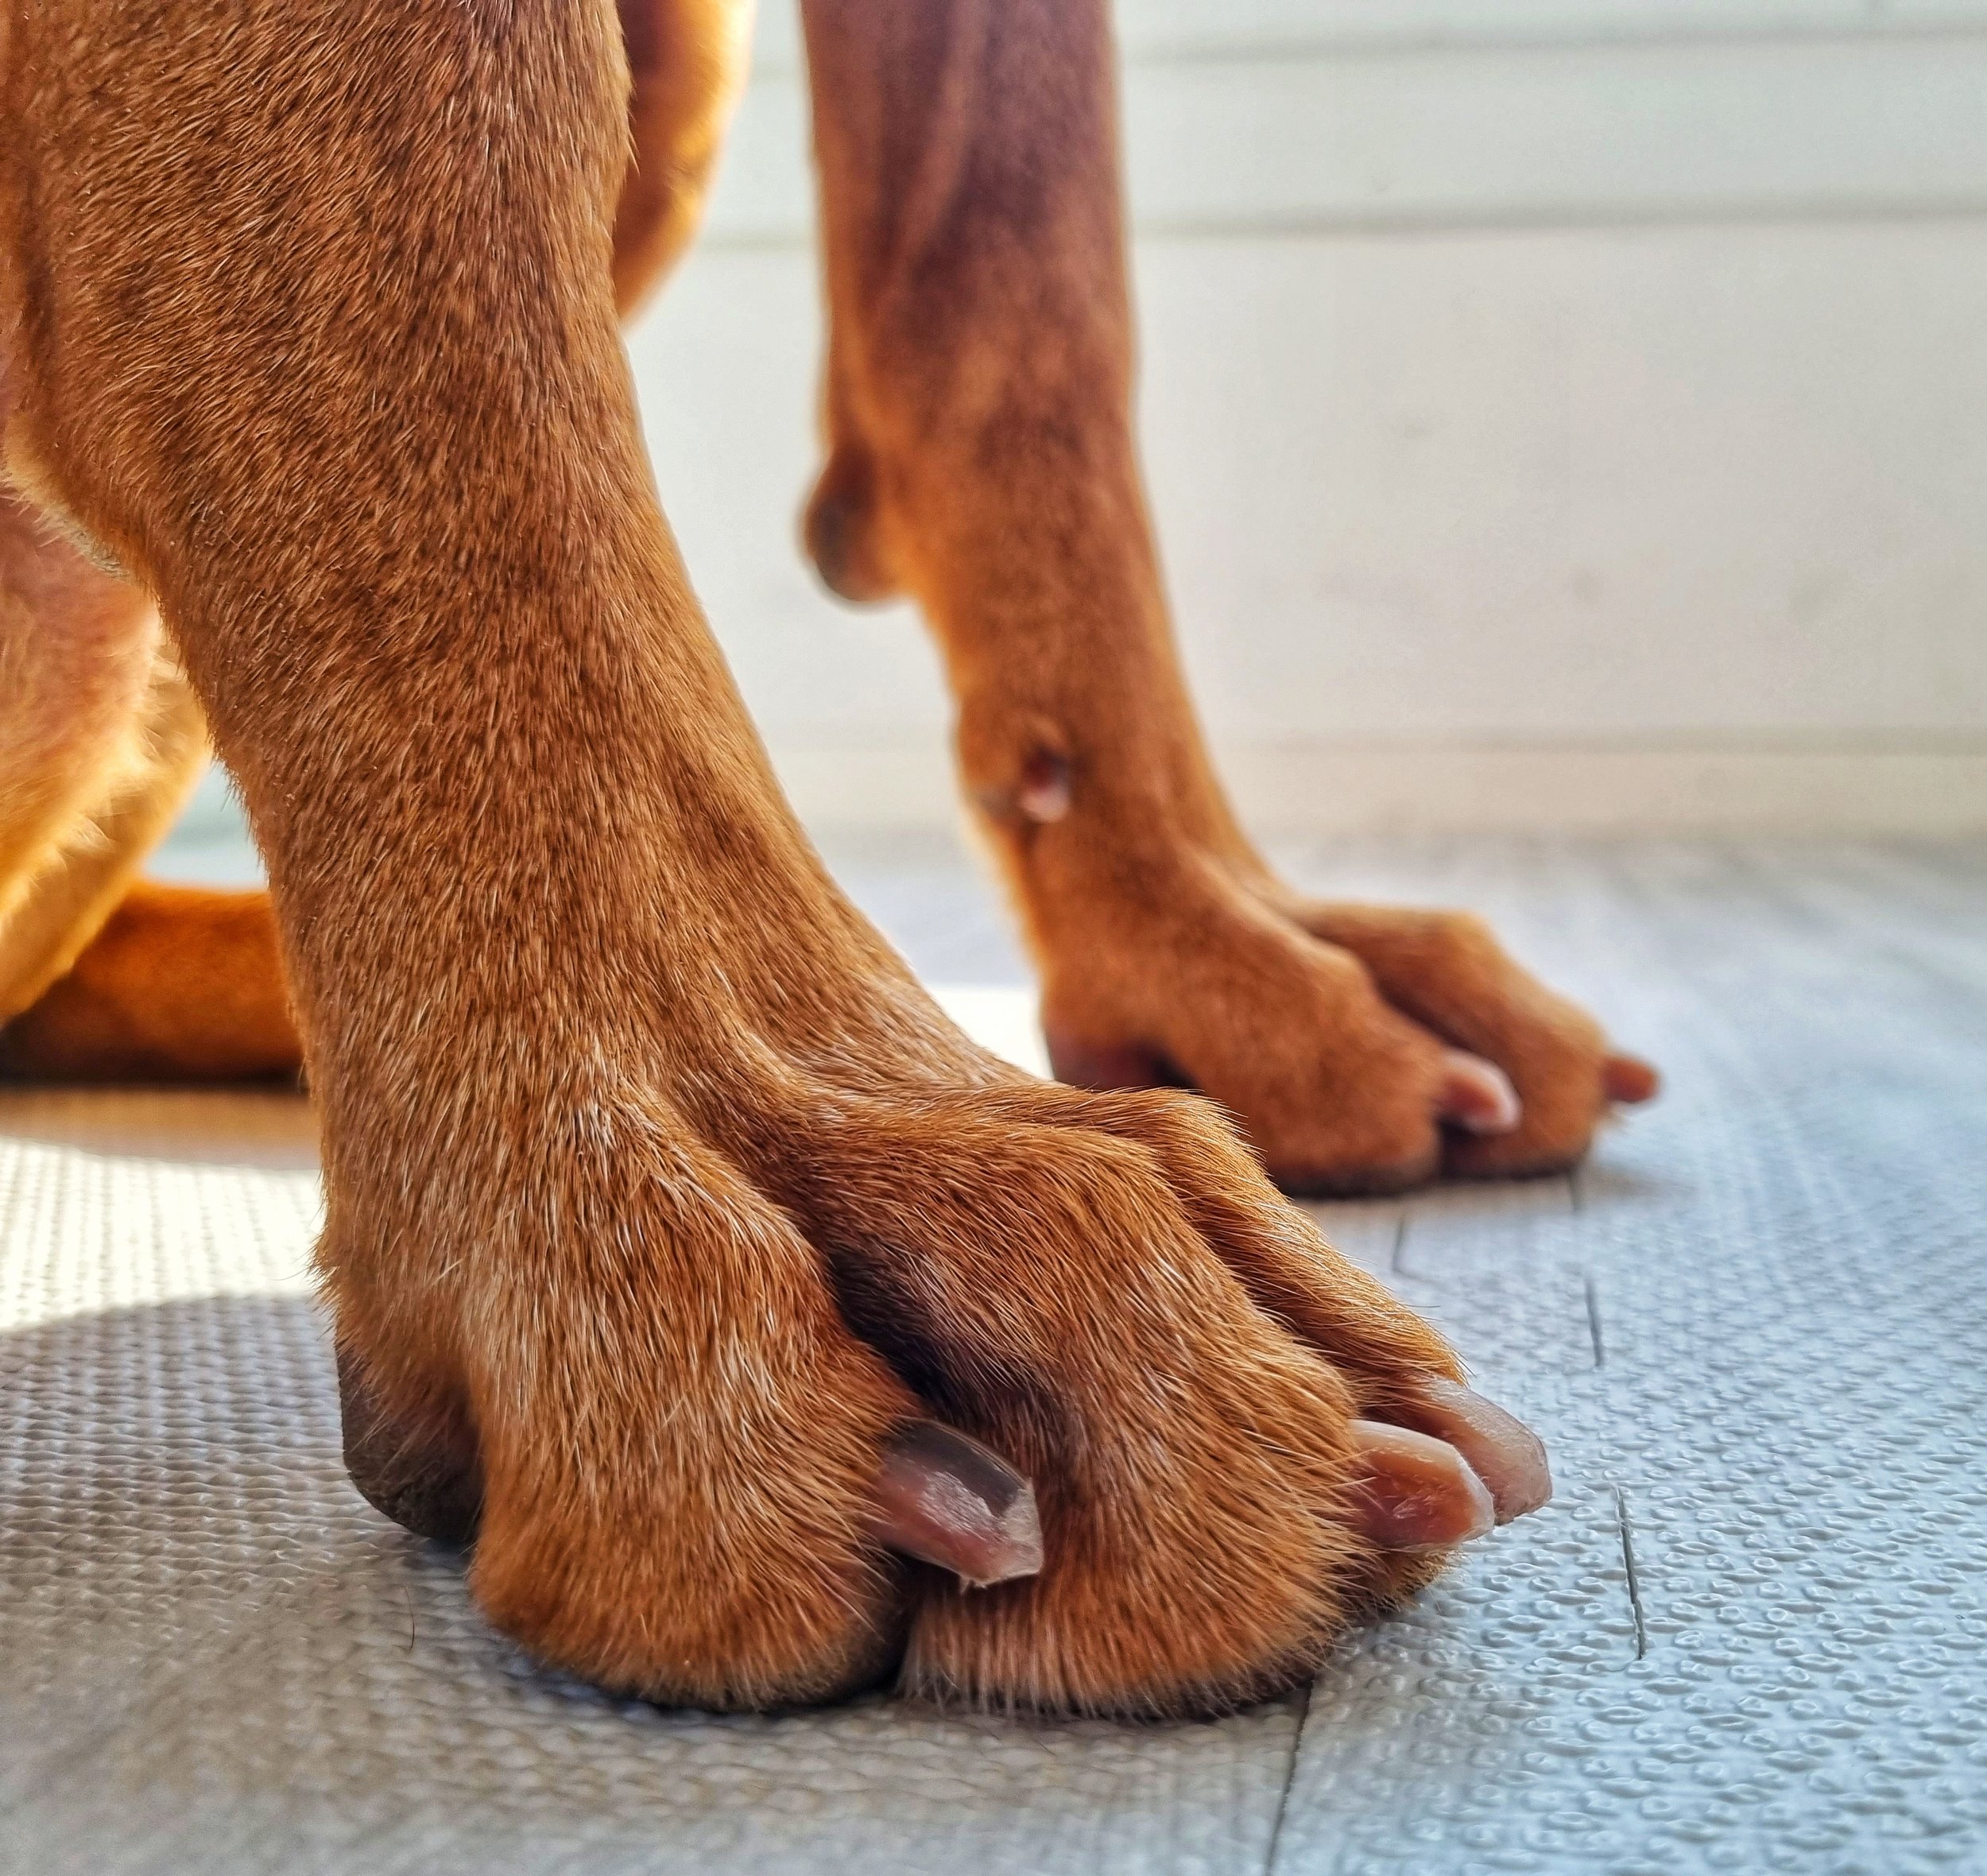 How to Trim Dog Nails in 5 Simple Steps